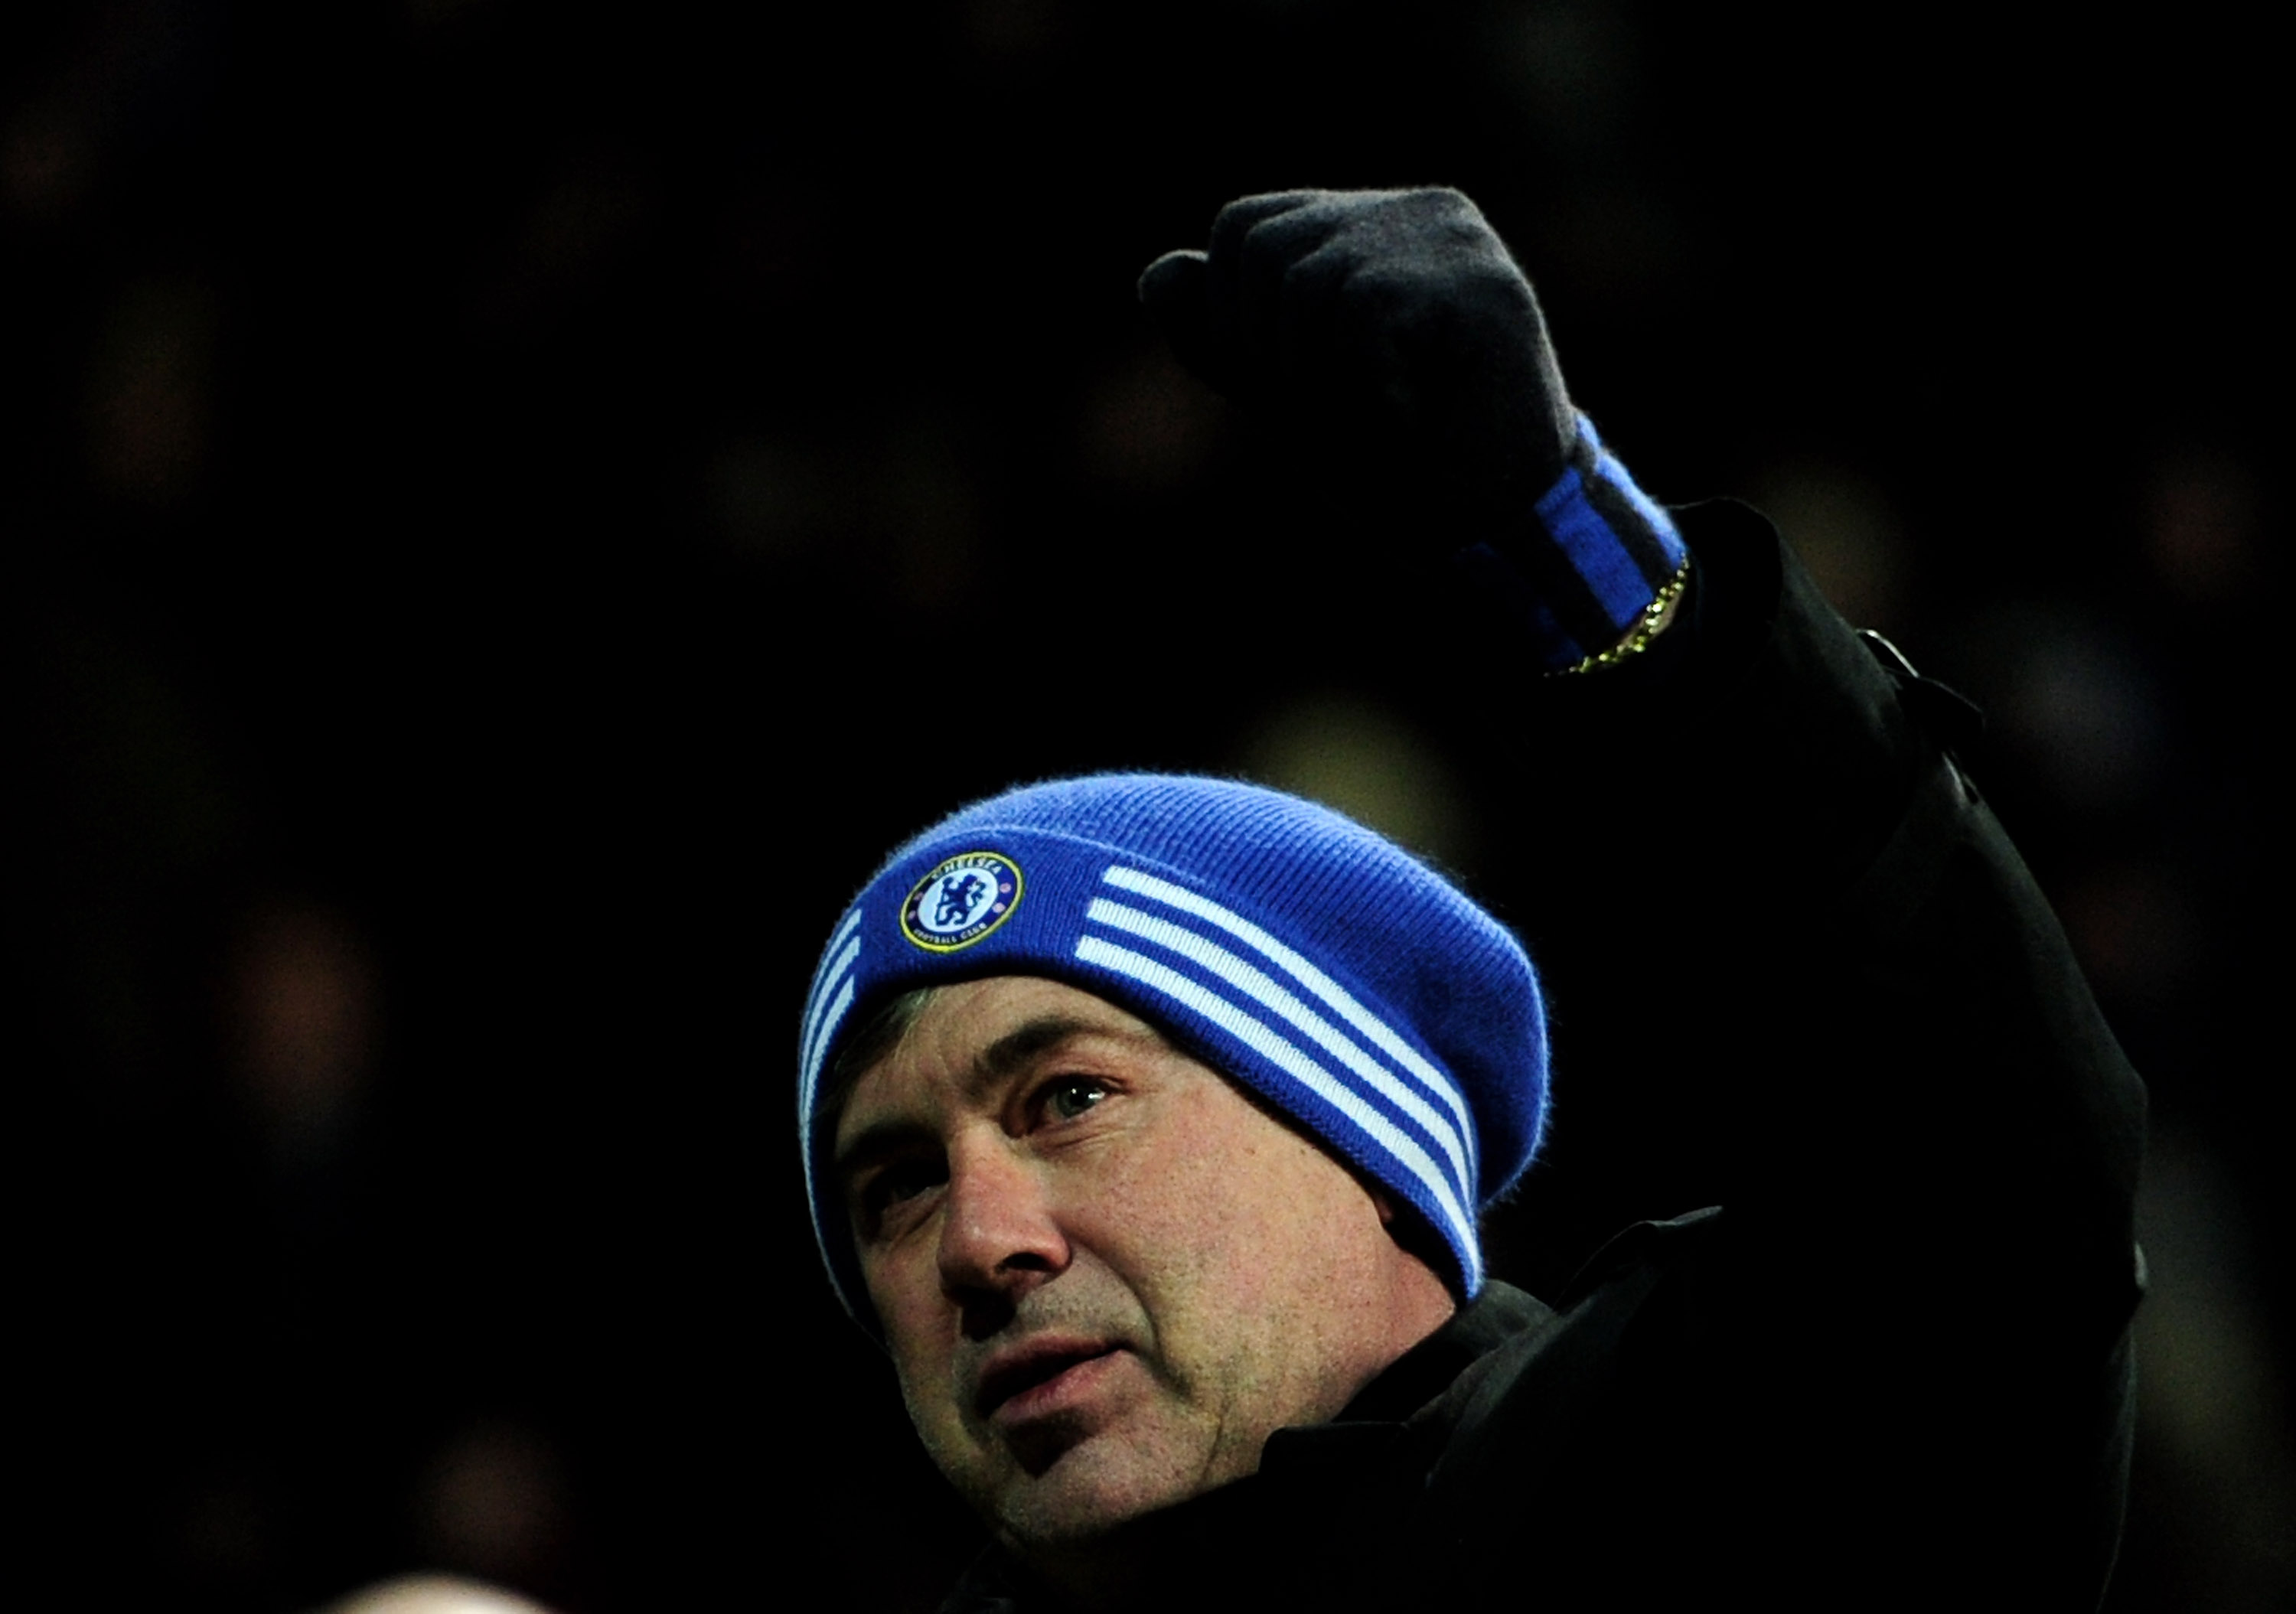 COPENHAGEN, DENMARK - FEBRUARY 22:  Chelsea Manager Carlo Ancelotti celebrates at the end of the UEFA Champions League round of 16 first leg match between FC Copenhagen and Chelsea at Parken Stadium on February 22, 2011 in Copenhagen, Denmark.  (Photo by